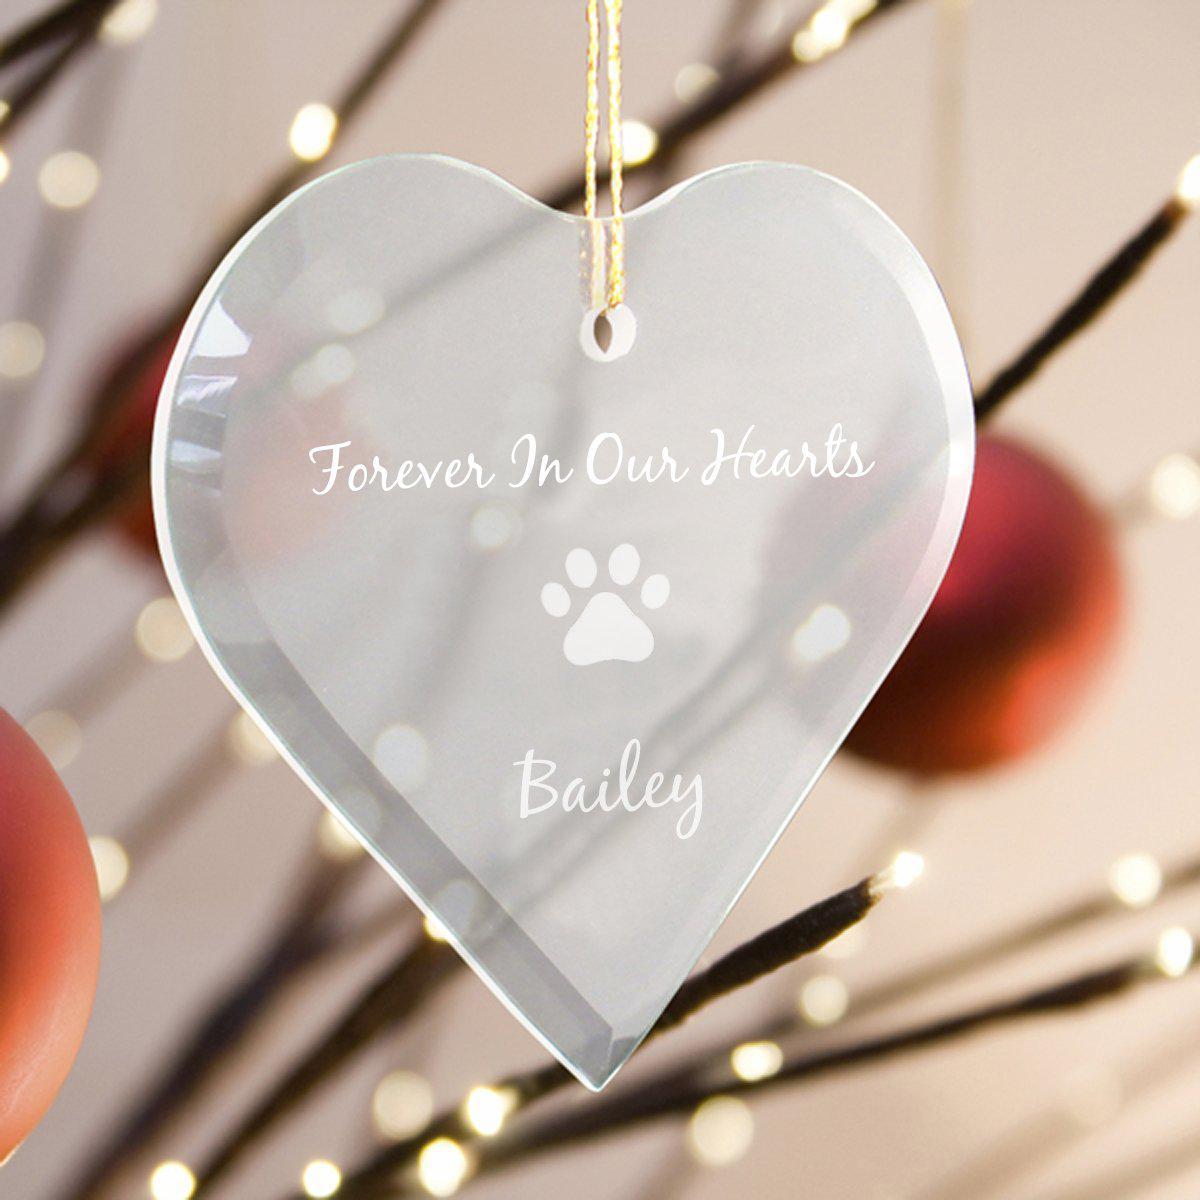 Pet Memorial Ornament - Forever In Our Hearts